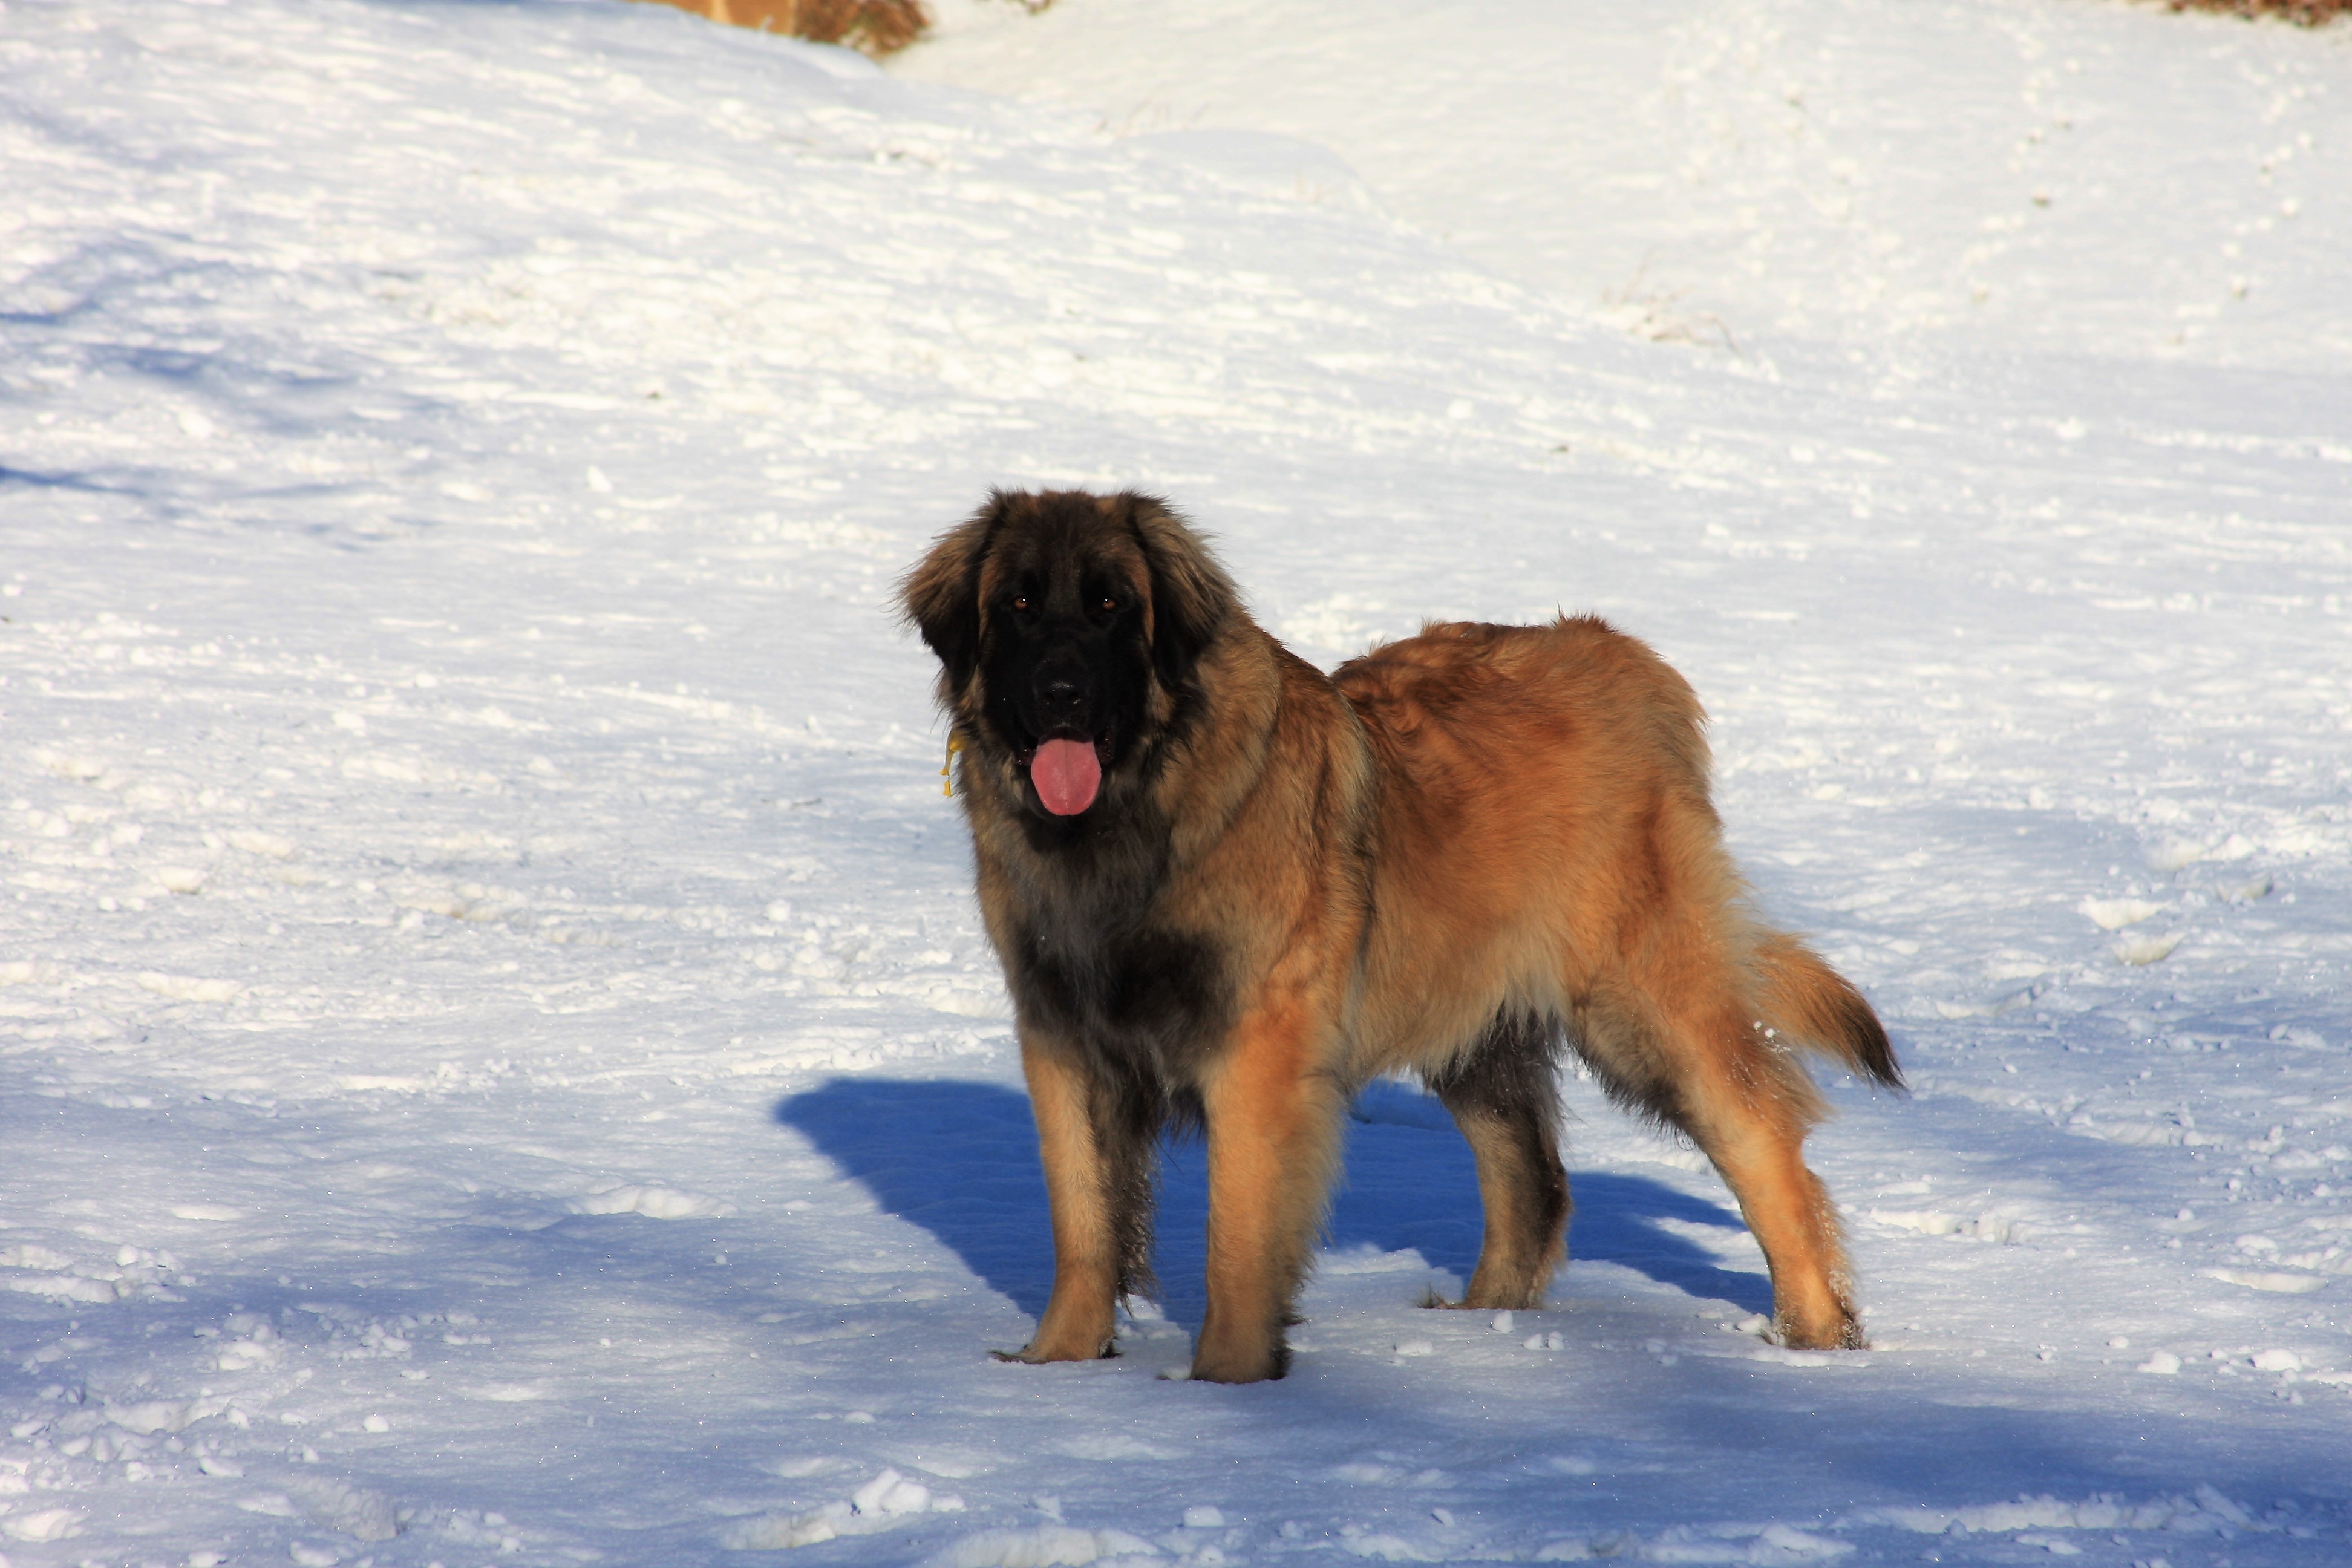 Digger a male Leonberger